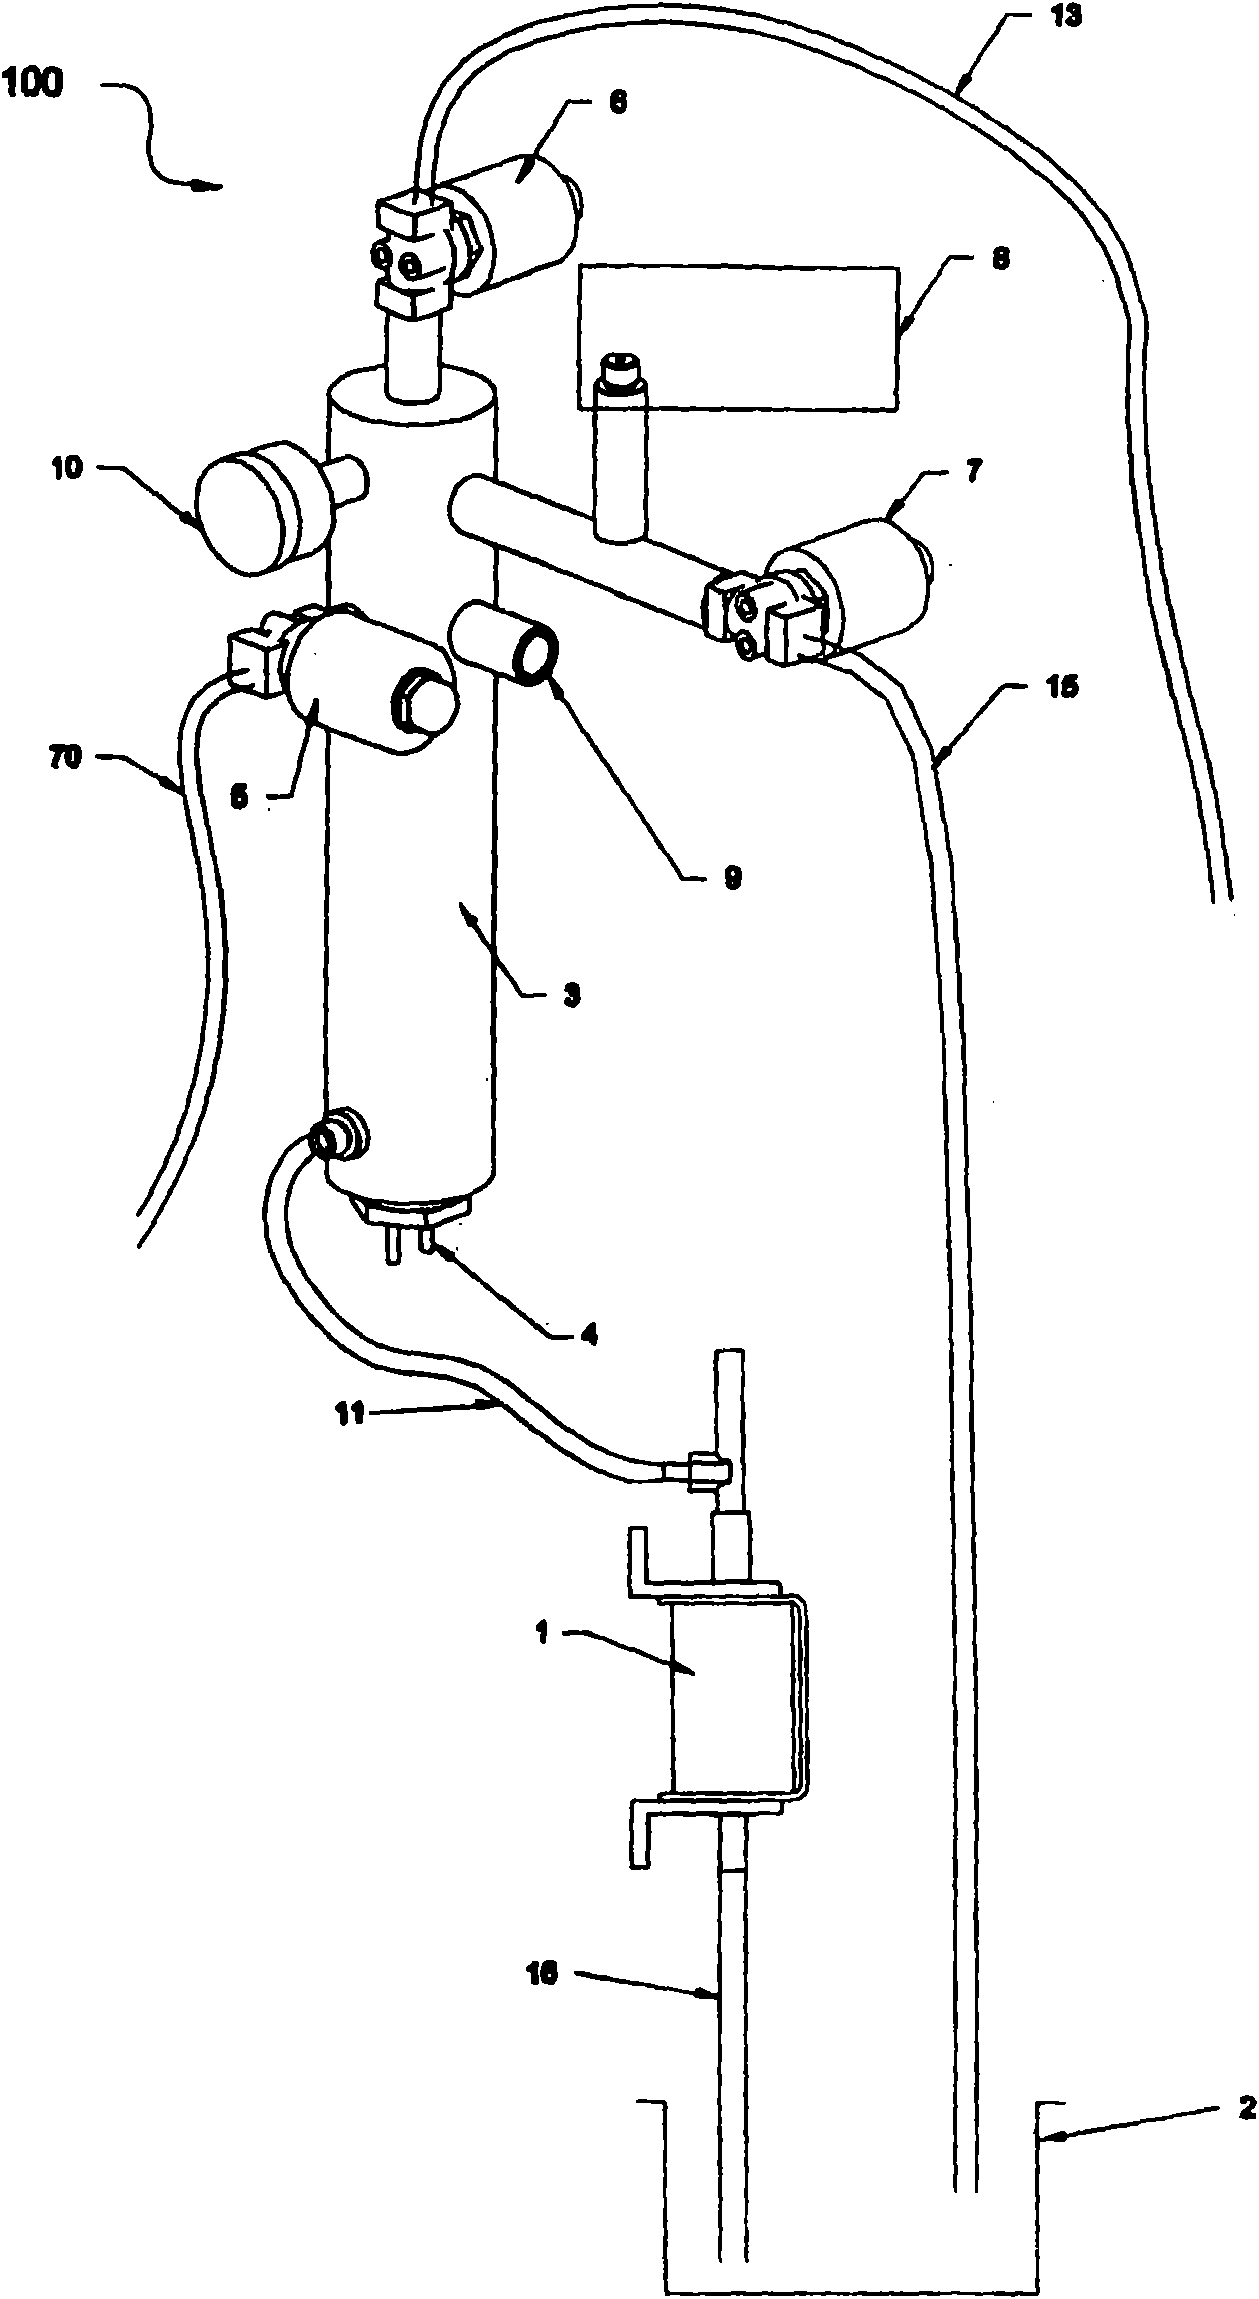 An assembly for automatic fresh brewing of hot beverage and dispensing thereof